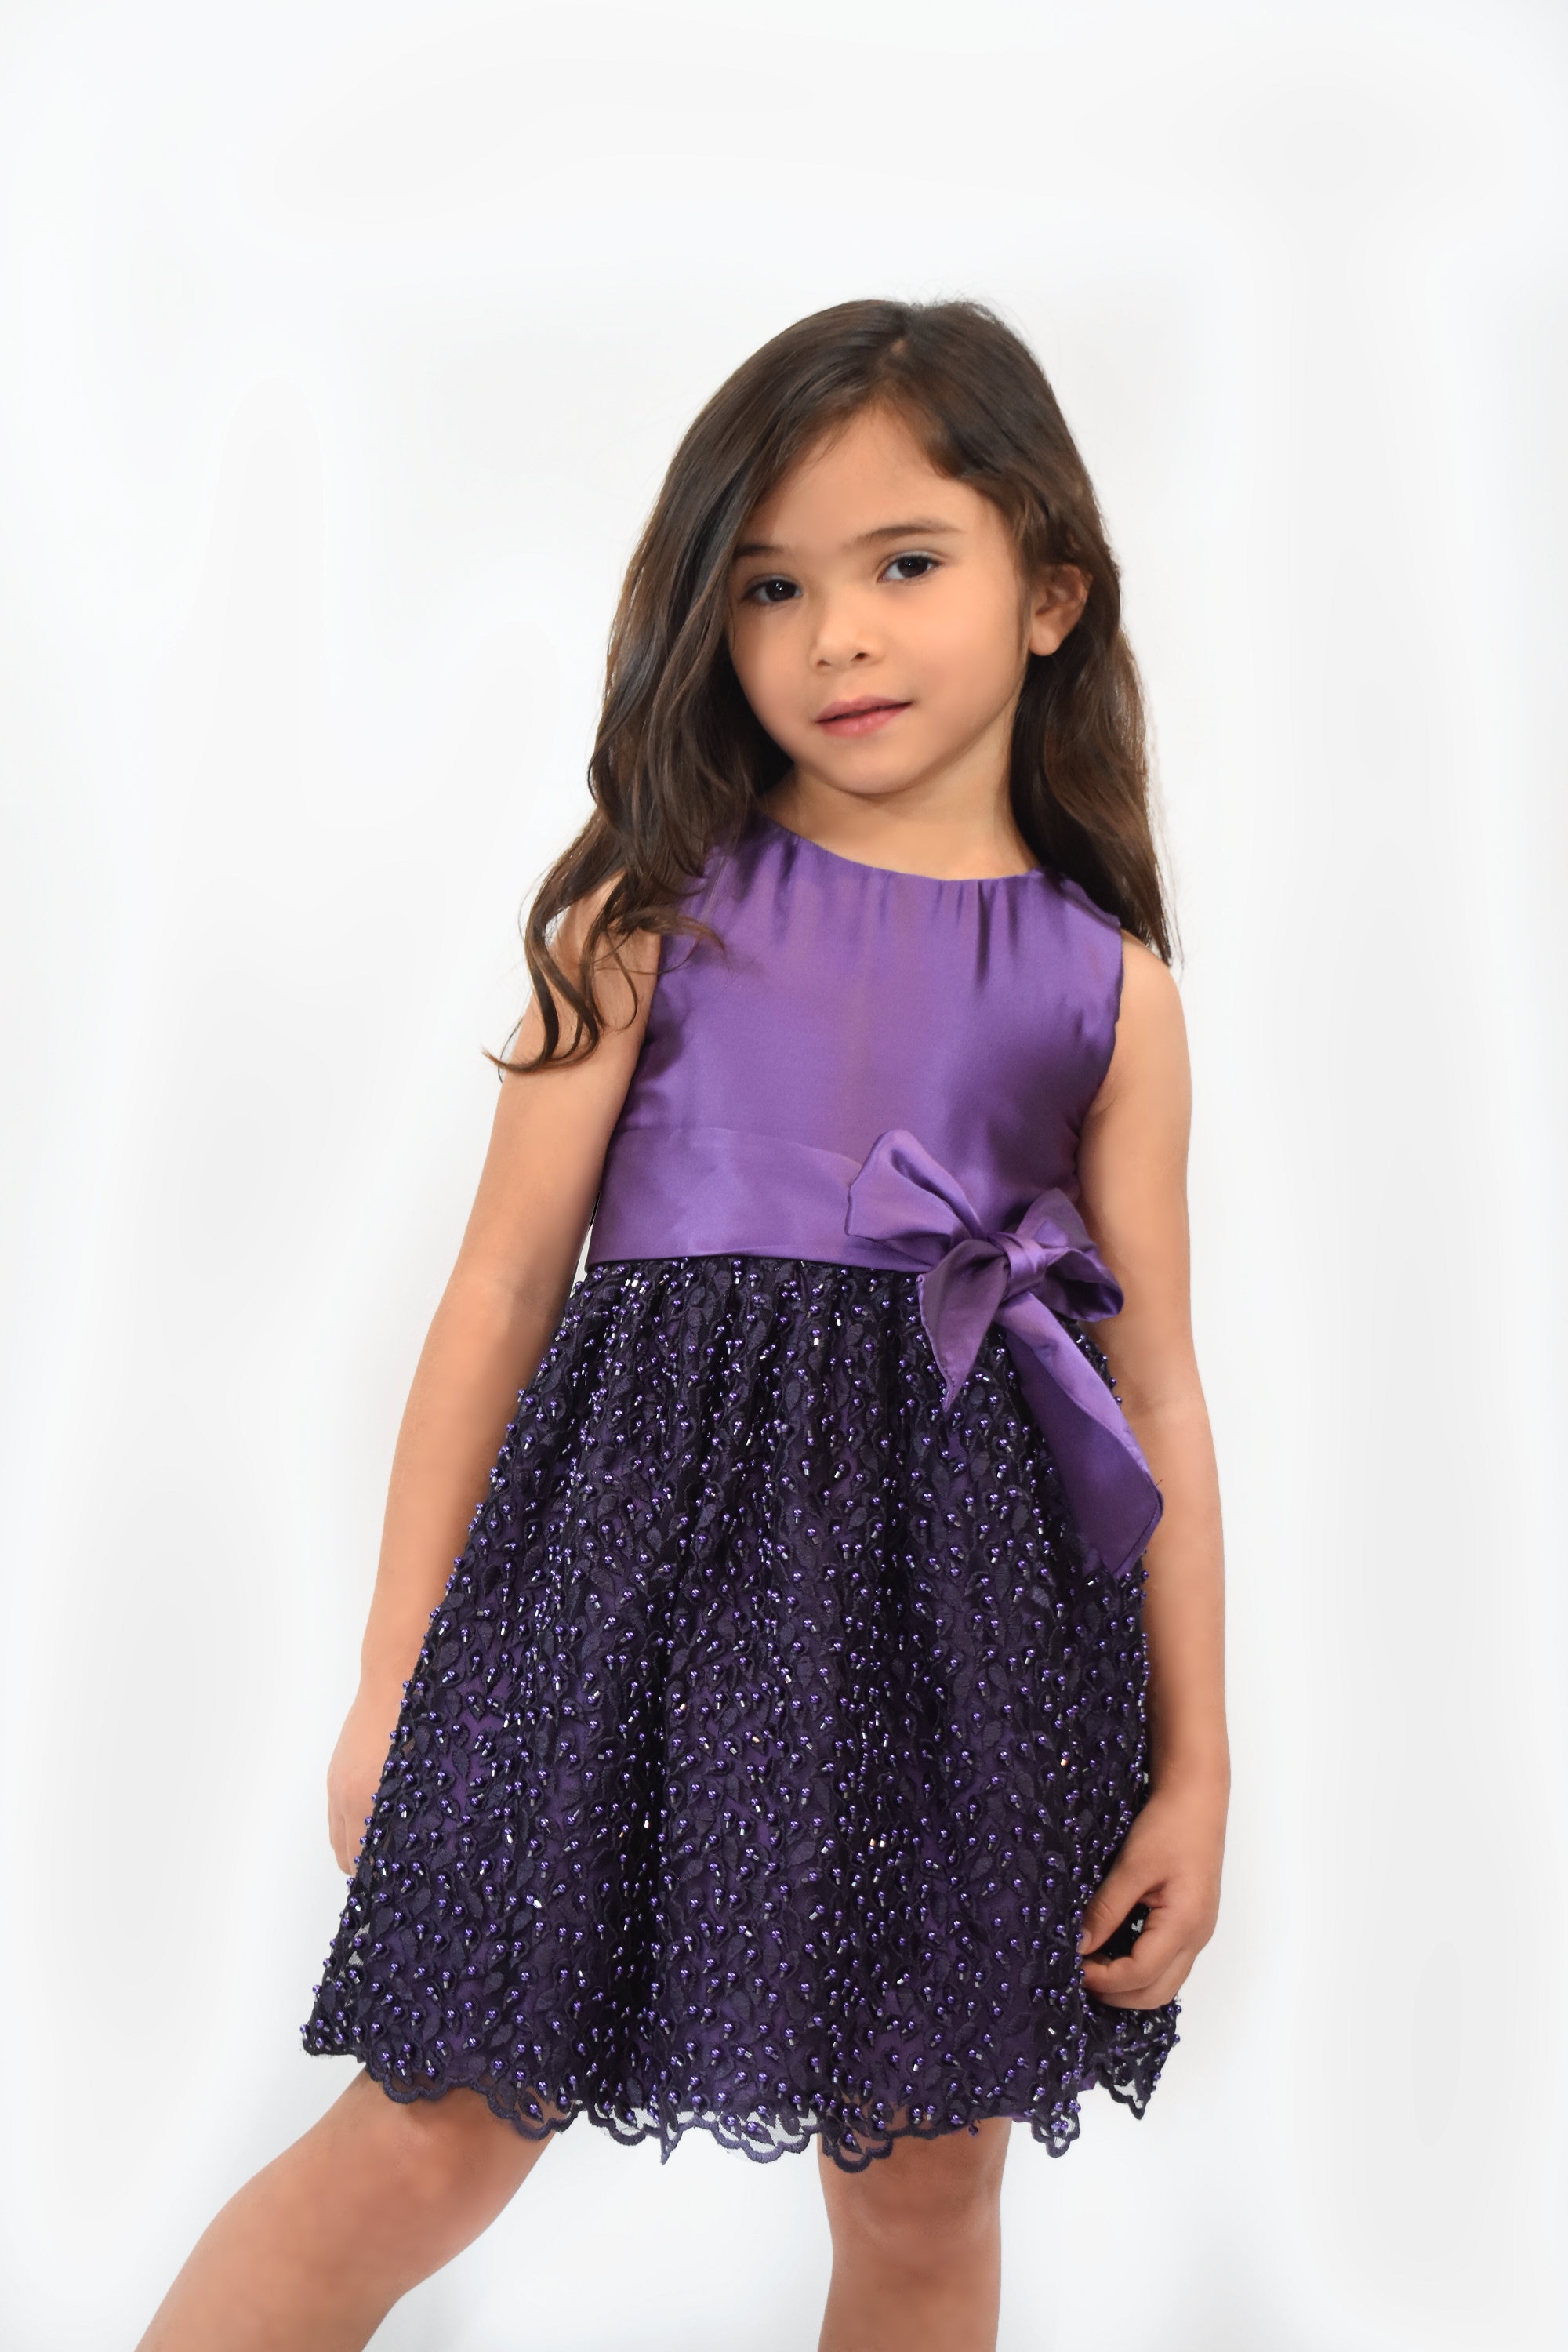 Baby Girl Dress For Formal Special Occasion Wear Floral Bow Design Elegant Wears 